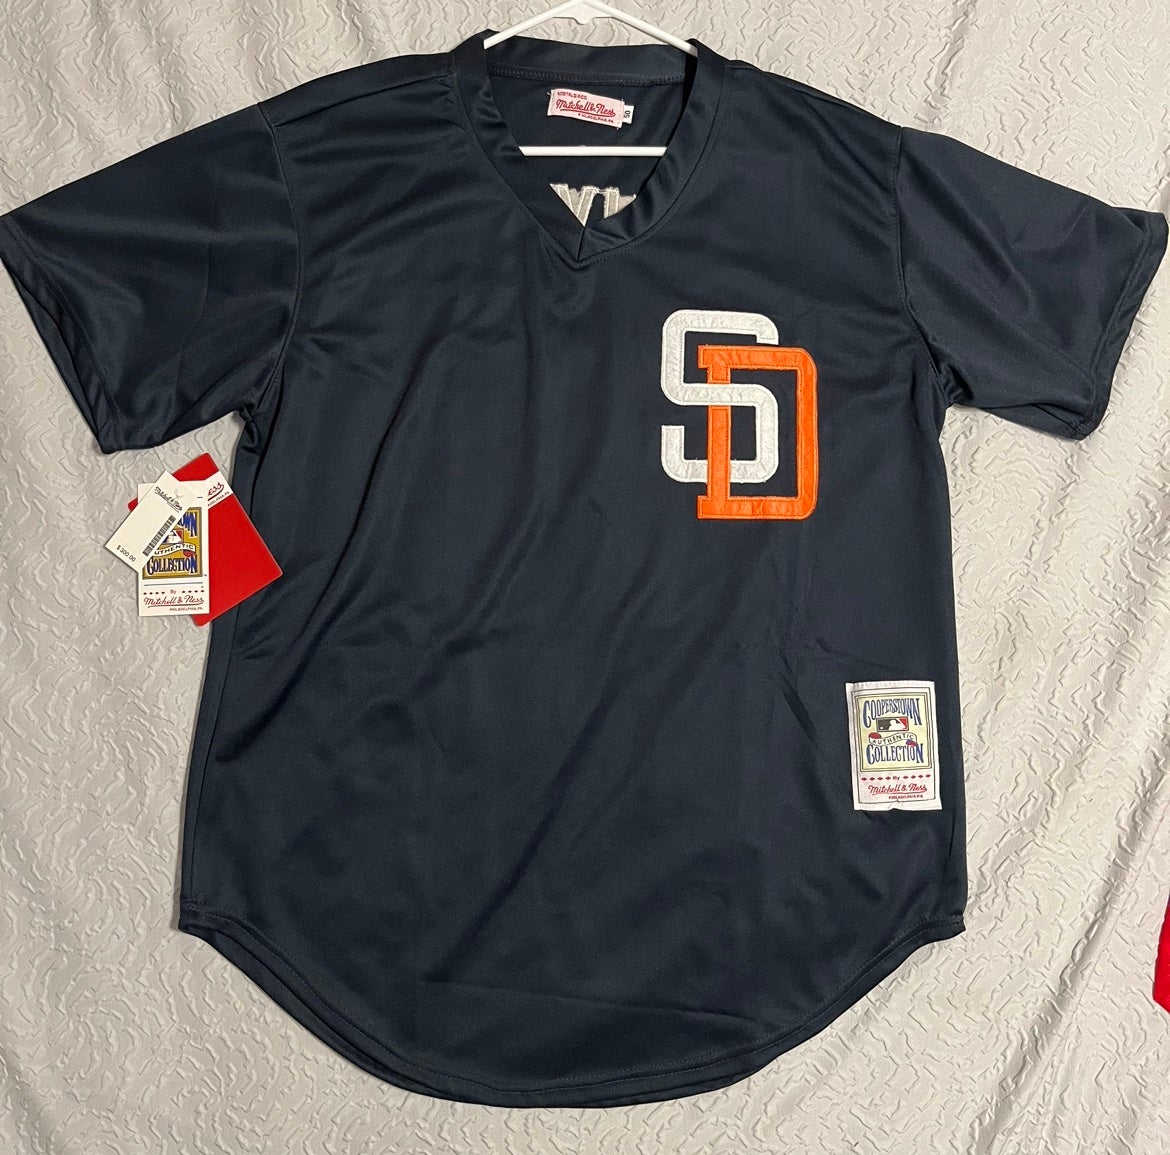 Tony Gwynn San Diego Padres Mitchell & Ness Cooperstown SIZE